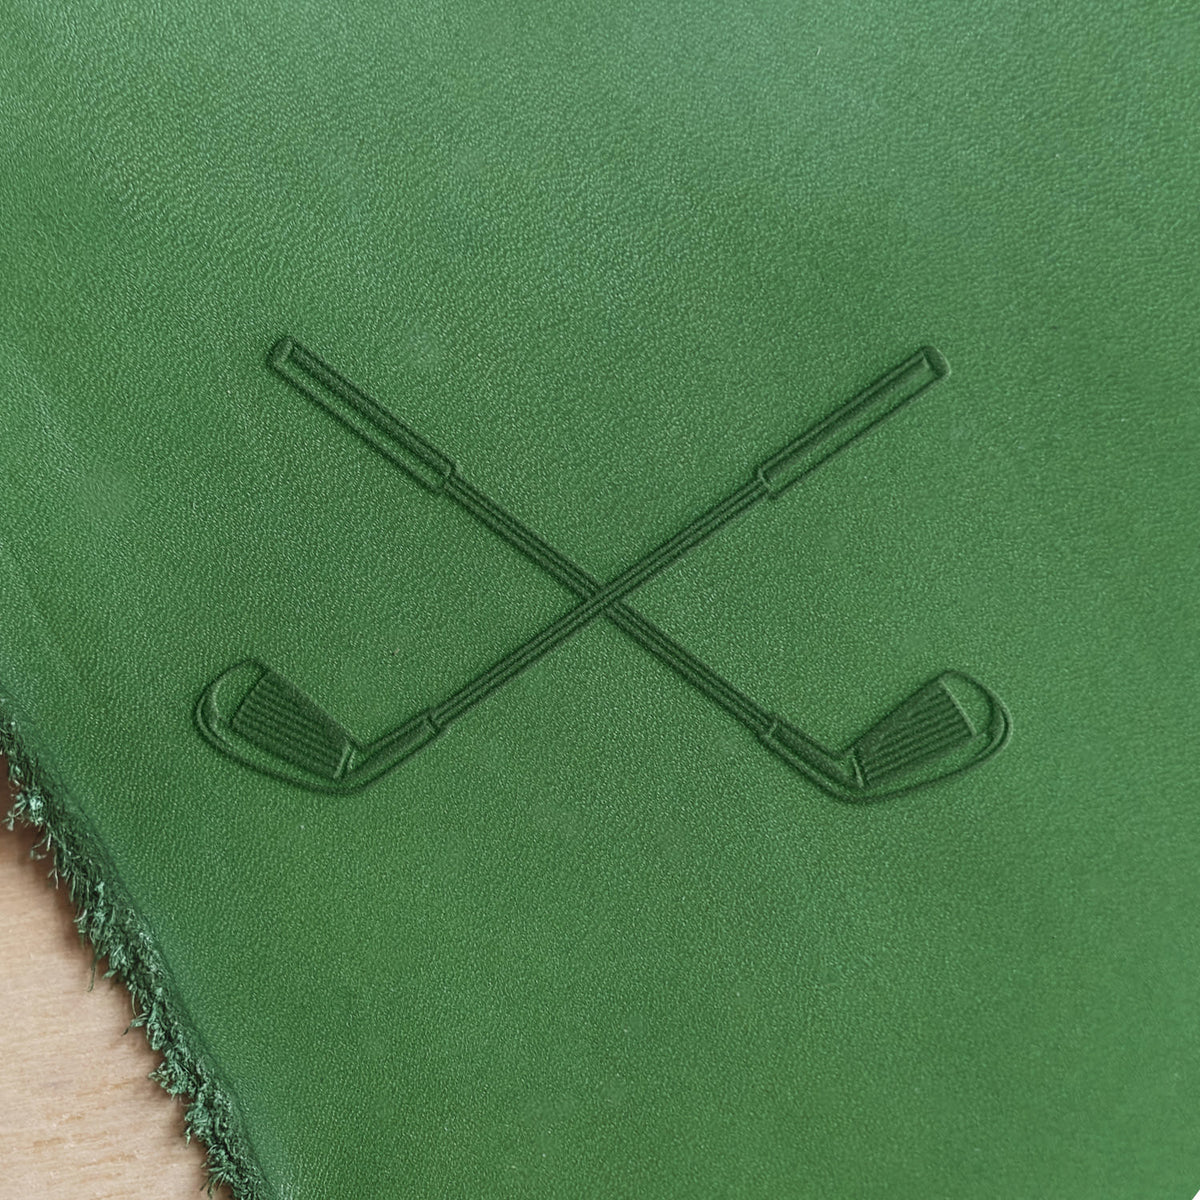 Golf Clubs Delrin Leather Stamp